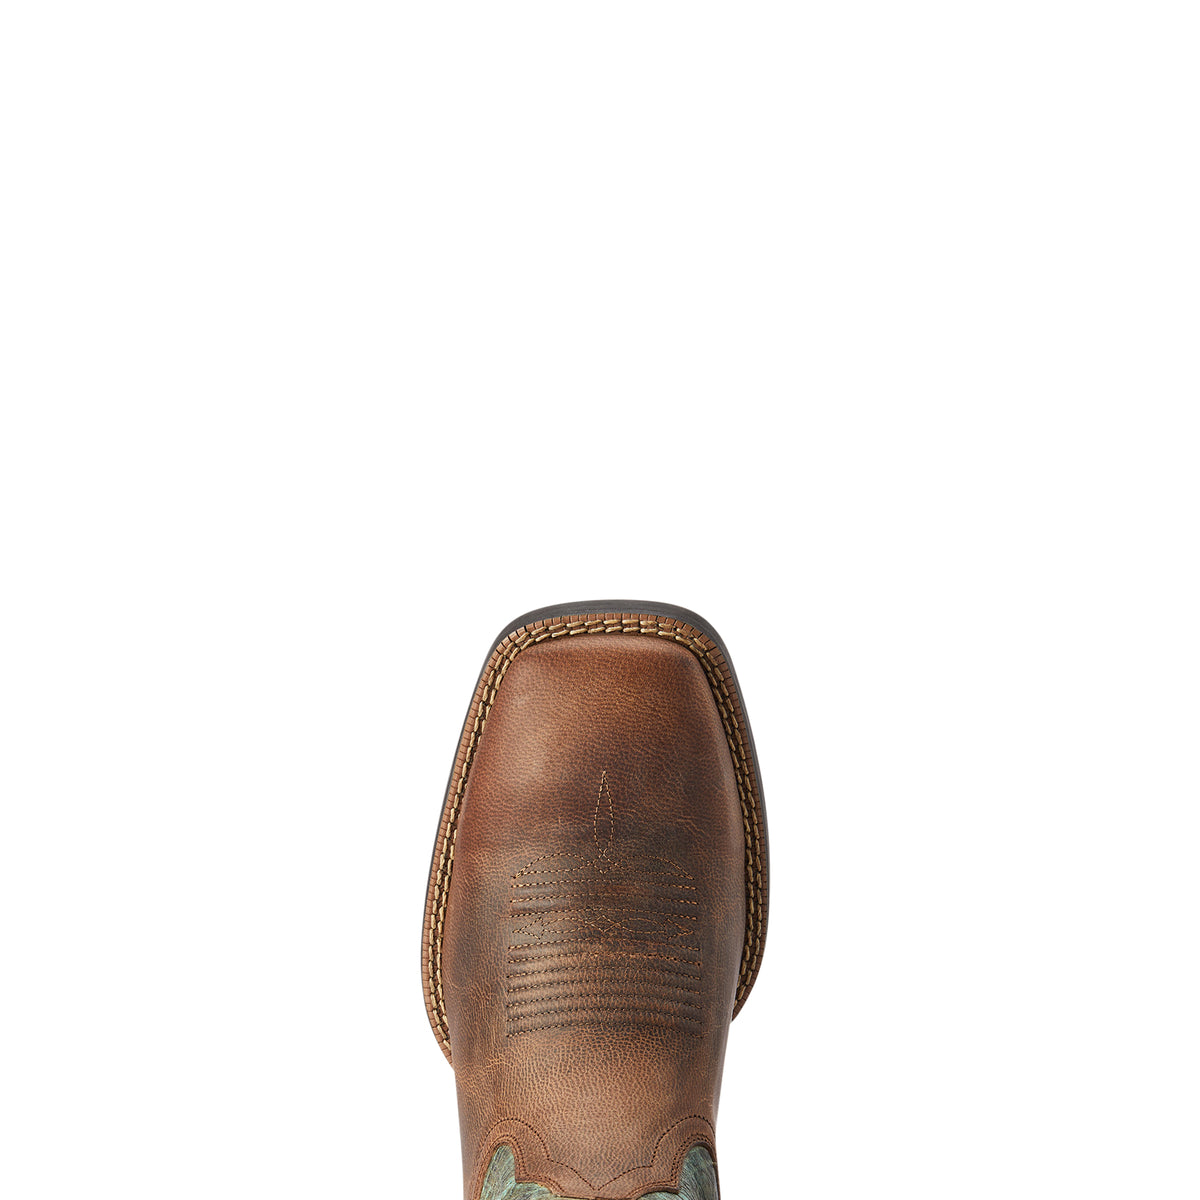 Ariat Mens Sport Rodeo - Loco Brown/Roaring Turquoise